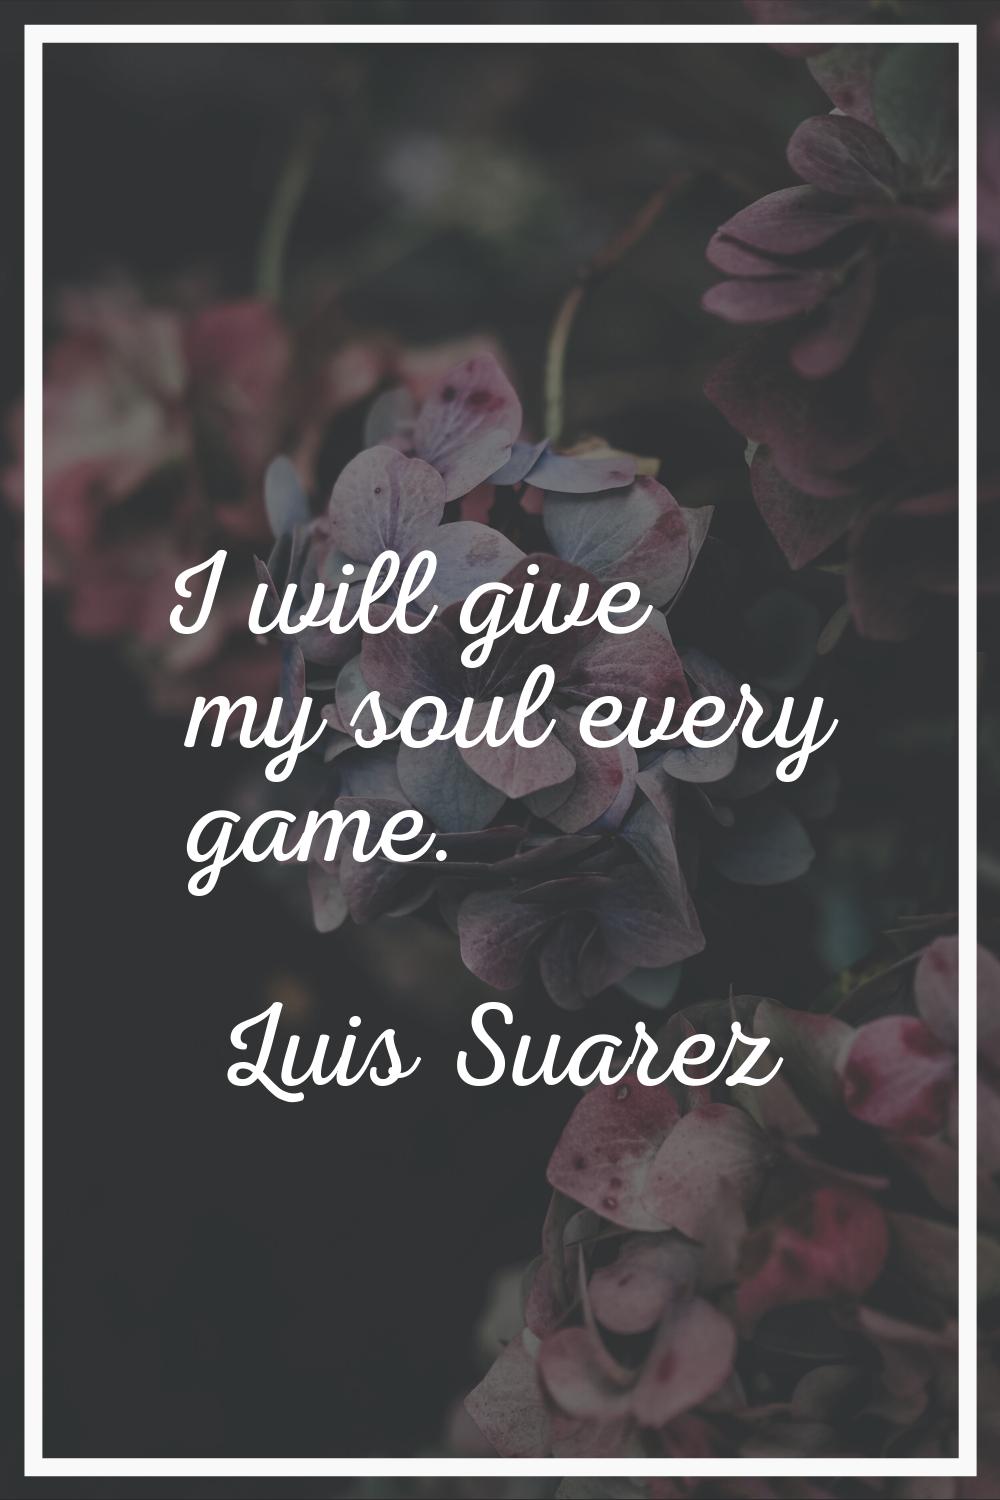 I will give my soul every game.